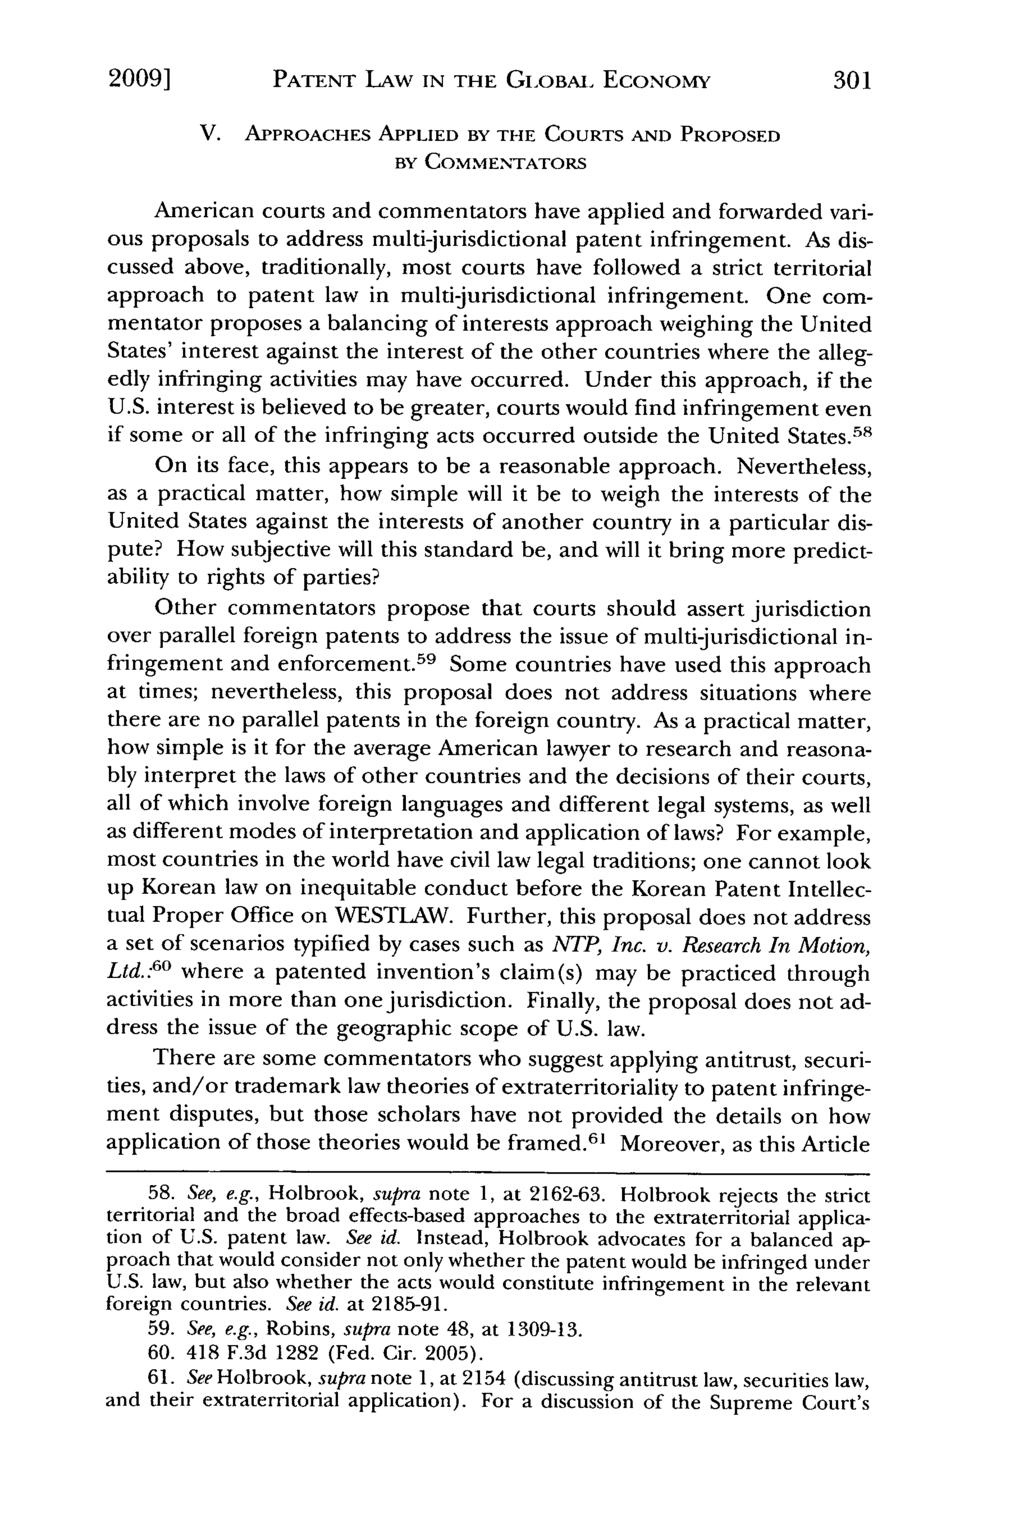 2009] Keyhani: Patent Law in the Global Economy: A Modest Proposal for U.S. Pate PATENT LAW IN THE GLOBAL ECONOMY V.